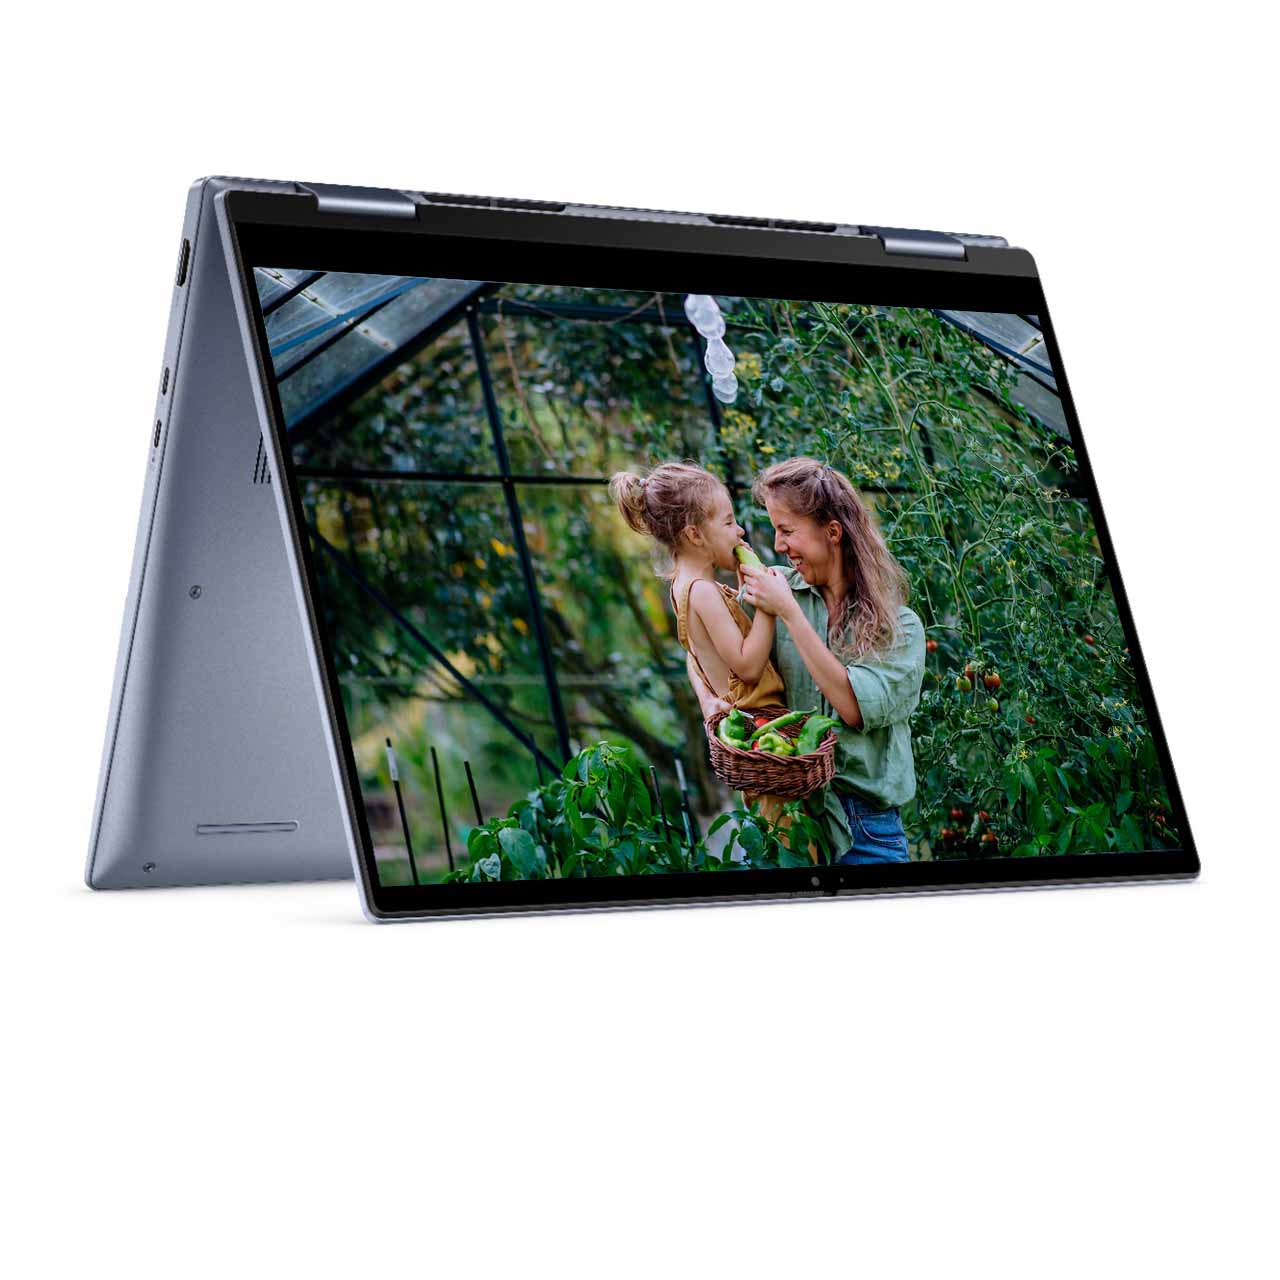 Inspiron 14” 7000 (7435) 2-in-1